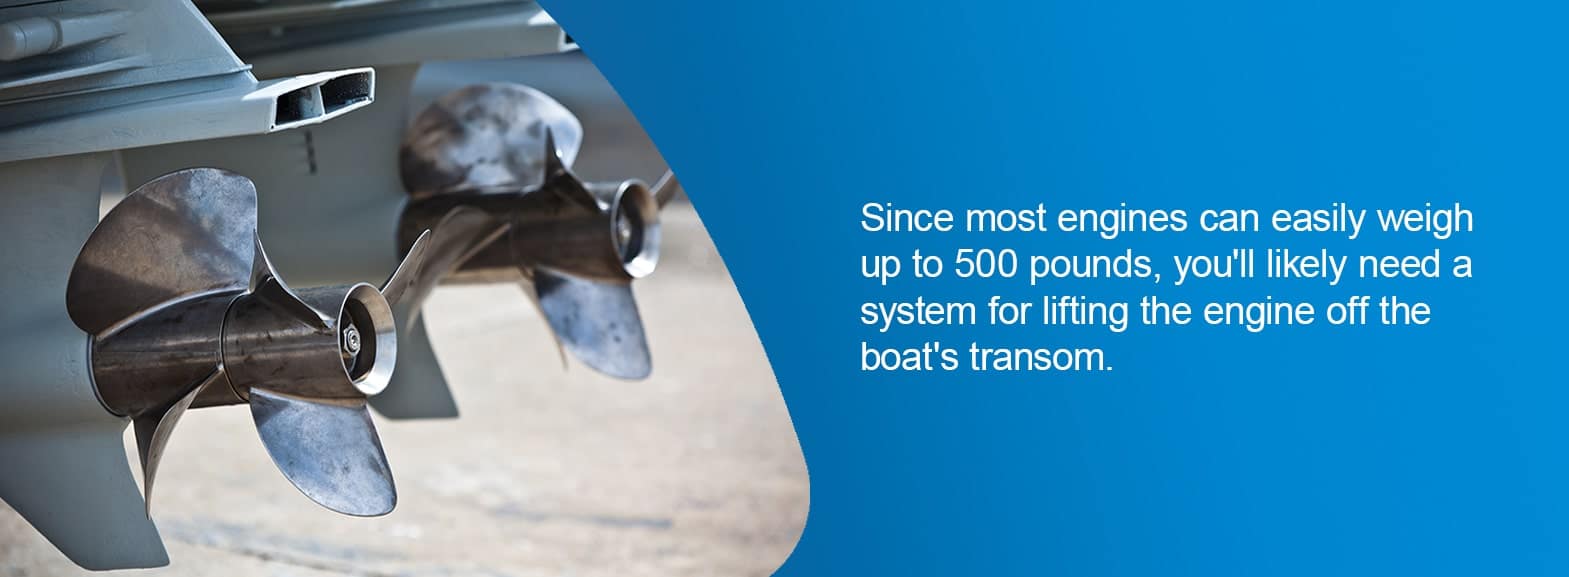 Since most engines can easily weigh up to 500 pounds, you'll likely need a system for lifting the engine off the boat's transom.